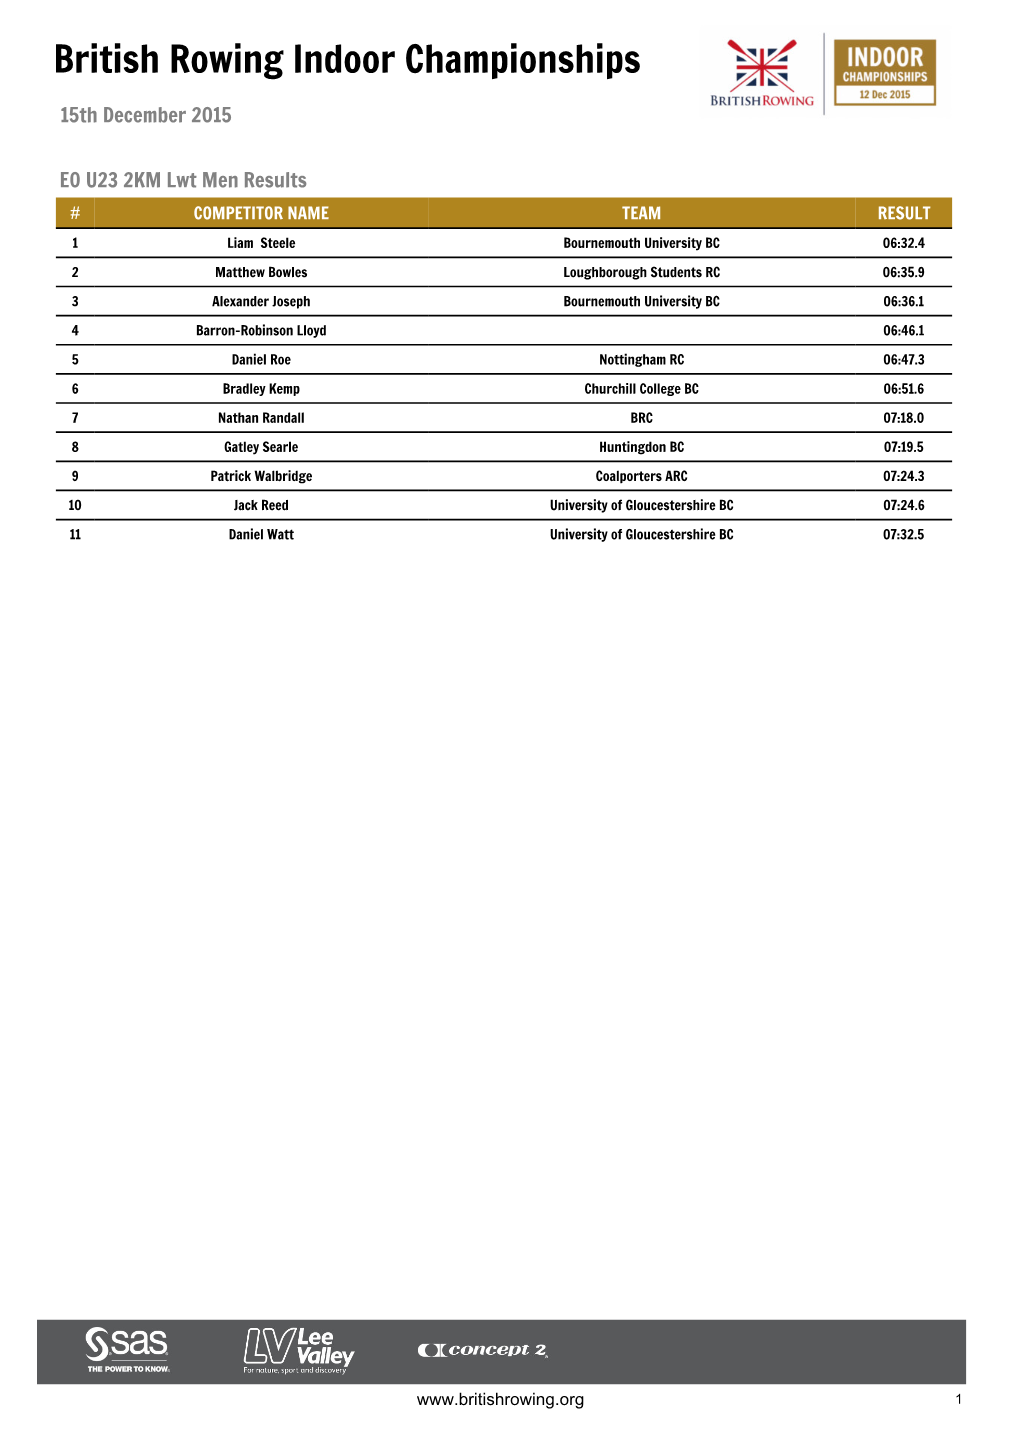 British Rowing Indoor Championships 2015 Results